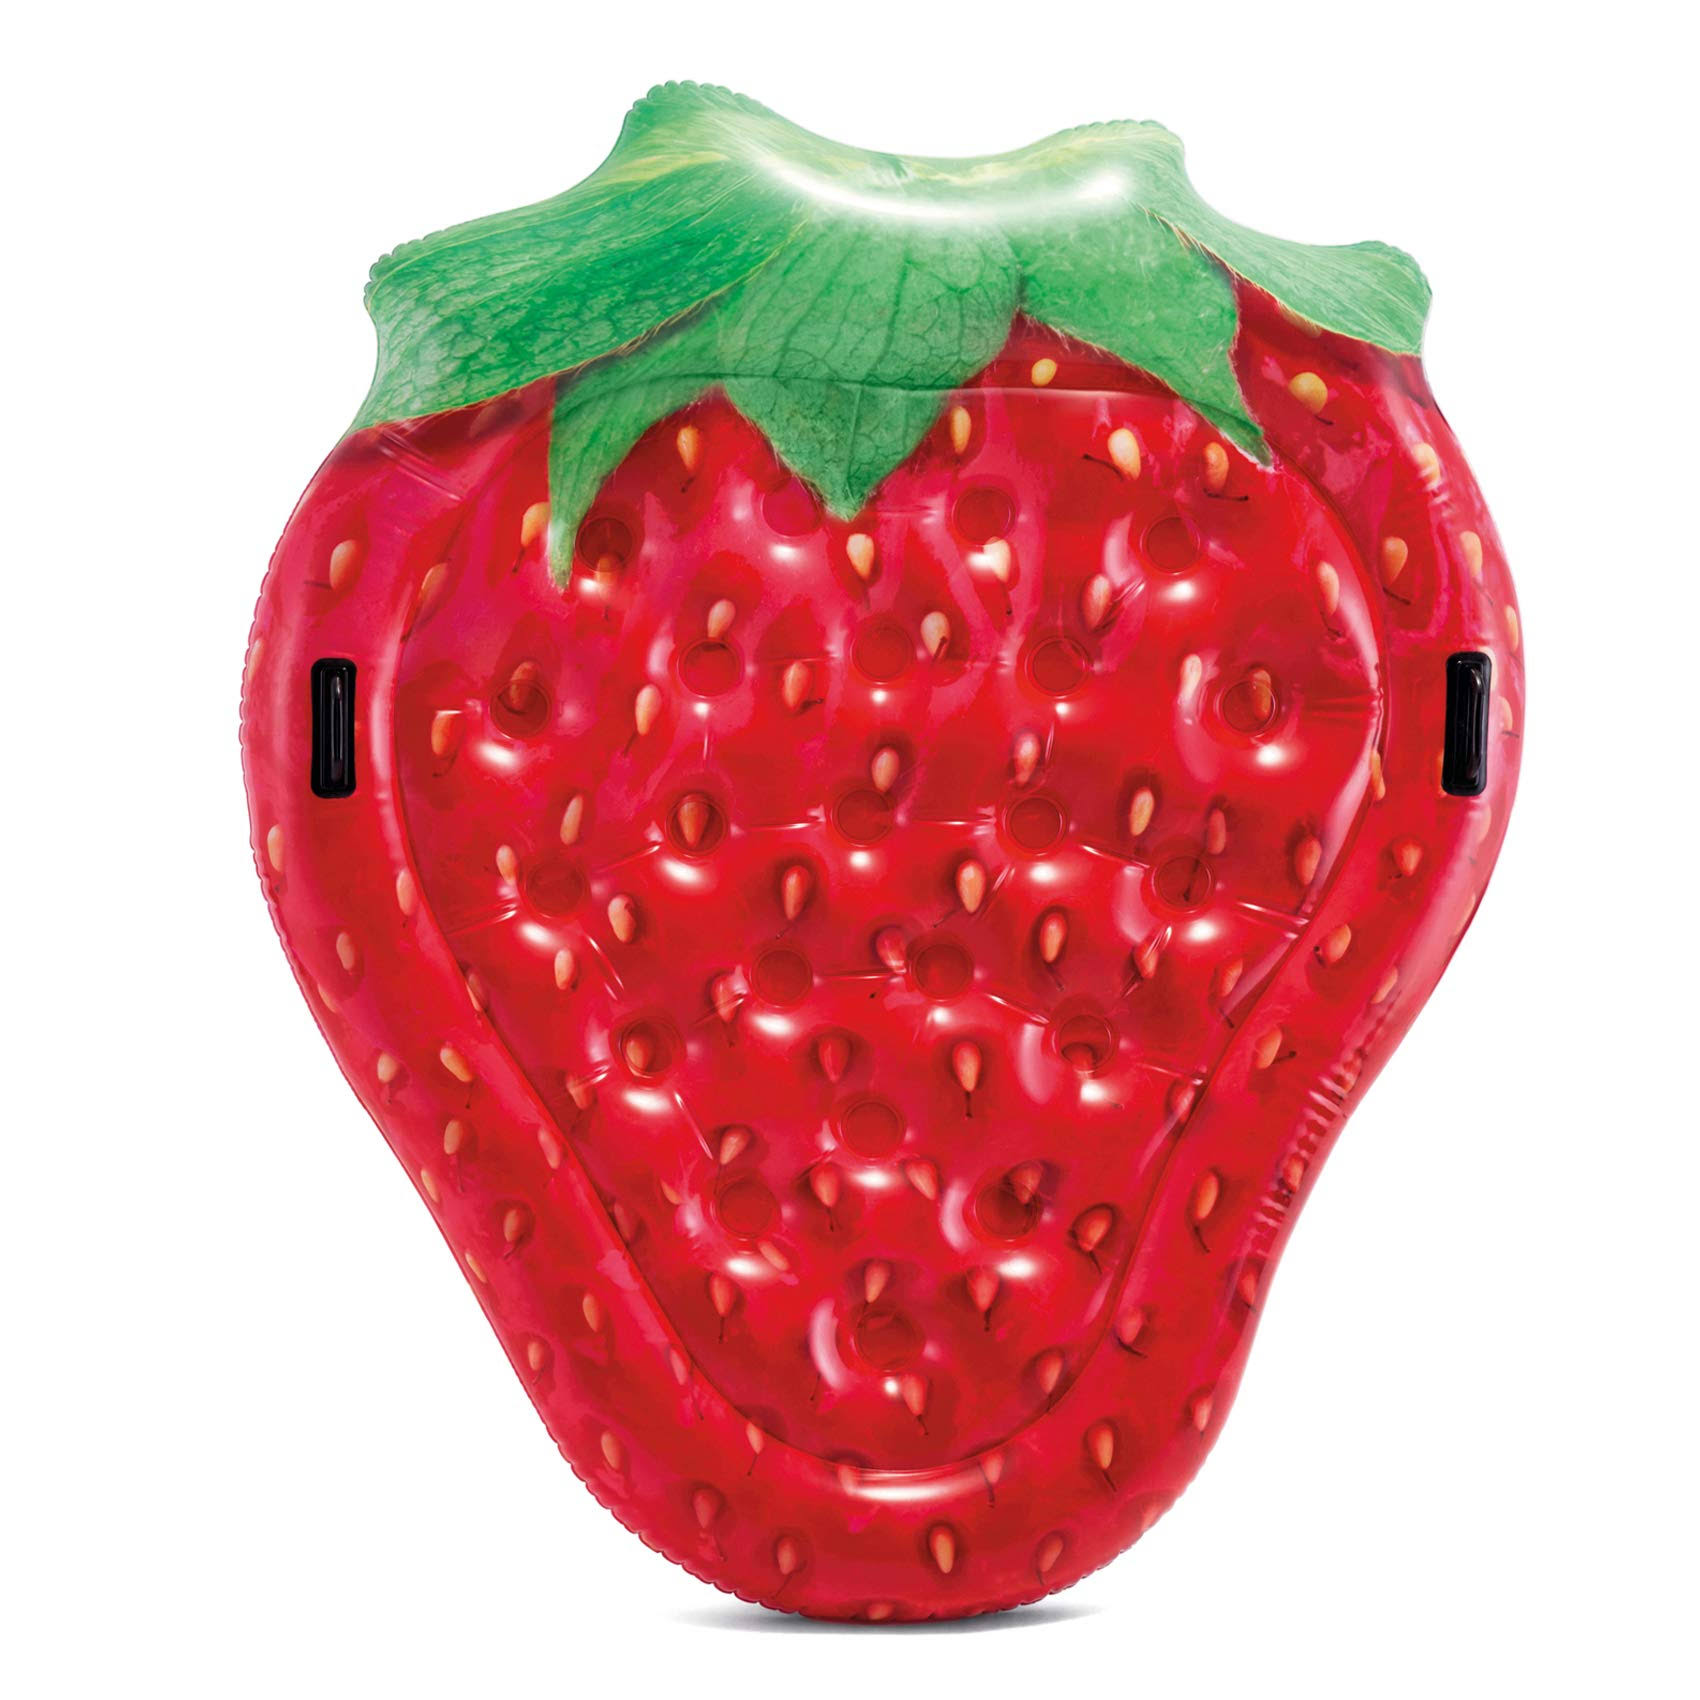 Intex Red Strawberry Inflatable Island, 63in x 52in x 10in